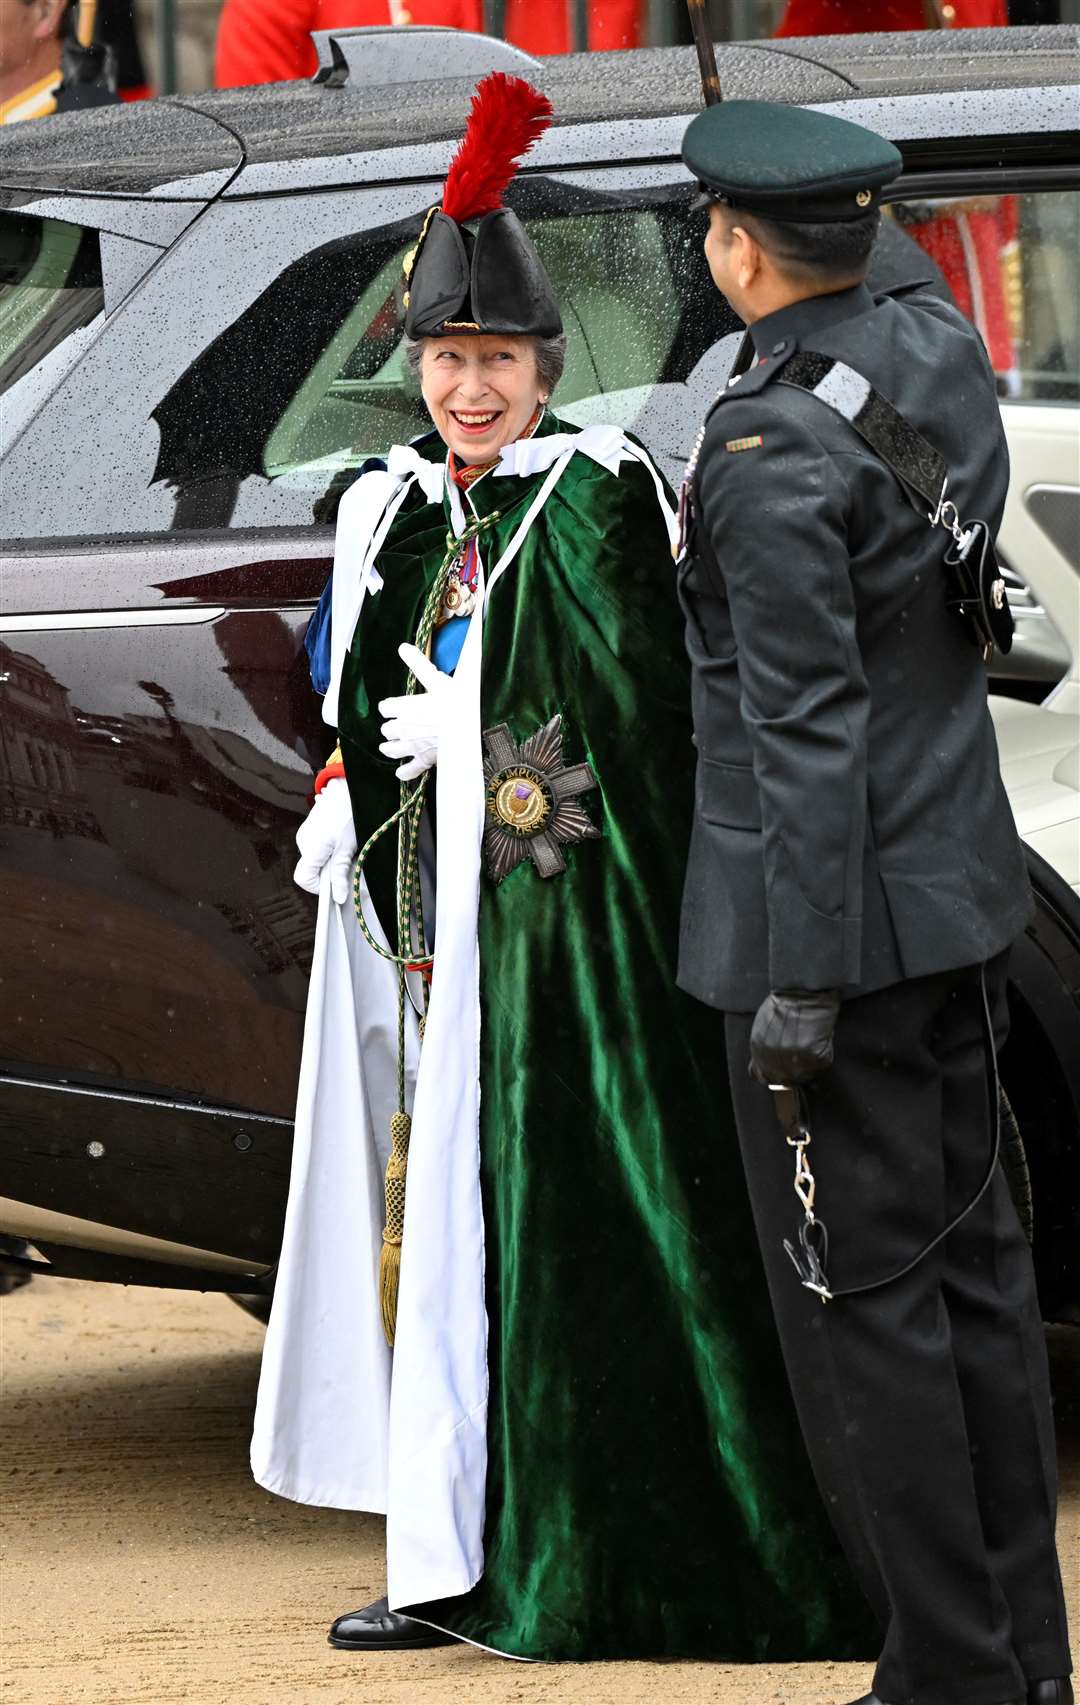 The Princess Royal arrives for the ceremony in a rainy London (Toby Melville/PA)